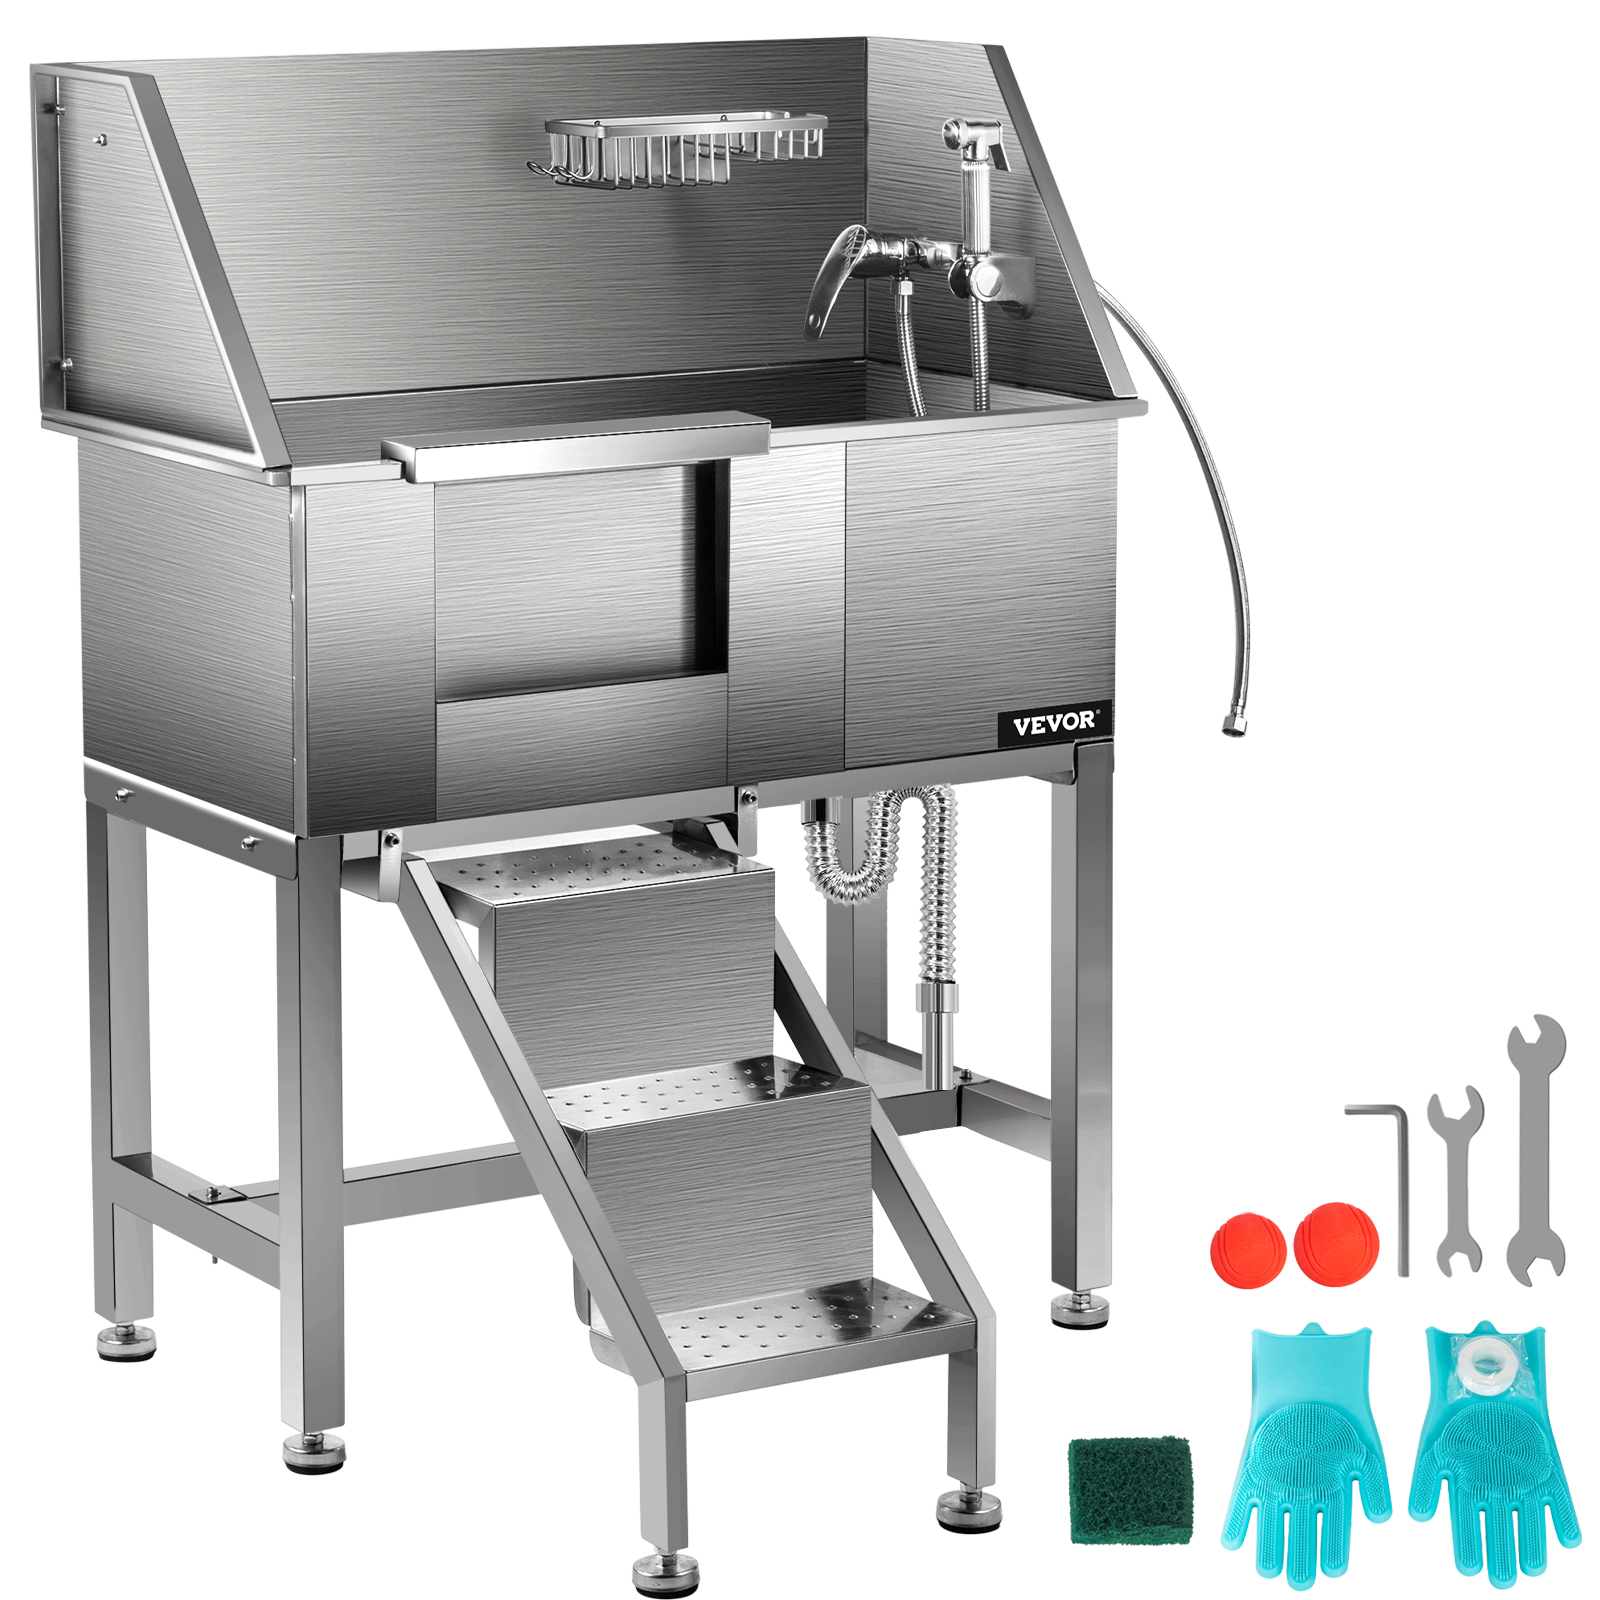 VEVOR Pet Grooming Tub Dog Wash Station 34" Stainless Steel with Accessories от Vevor Many GEOs